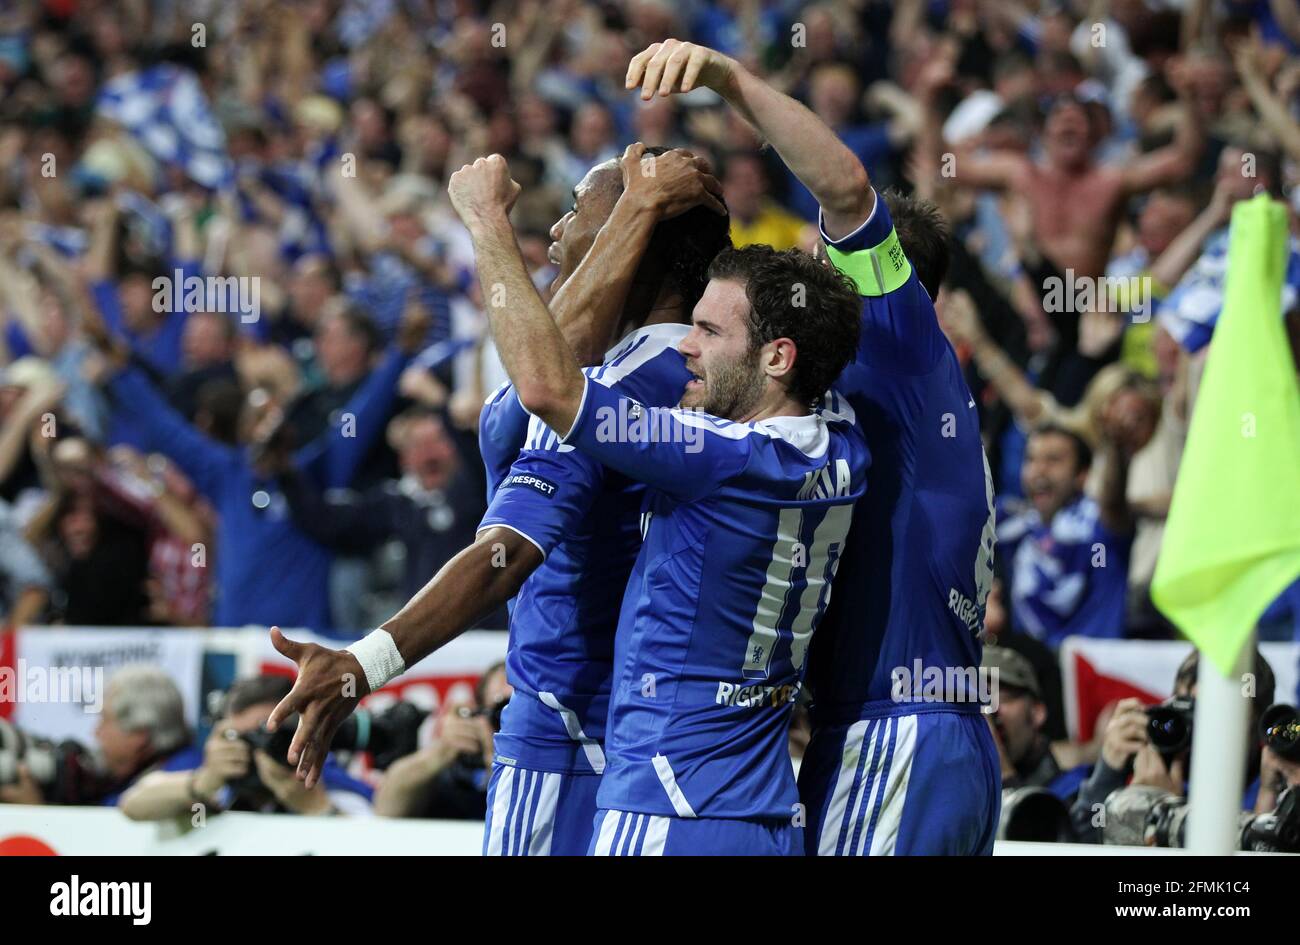 Didier Drogba  ( Chelsea ) celebrates as he scores the goal 1:1  Fussball Championsleague   Final FC Chelsea - FC Bayern Muenchen 2011 / 2012 UEFA Champions League Final FC Chelsea - FC Bayern  5:4  munich 19. 5. 2012 © diebilderwelt / Alamy Stock Stock Photo